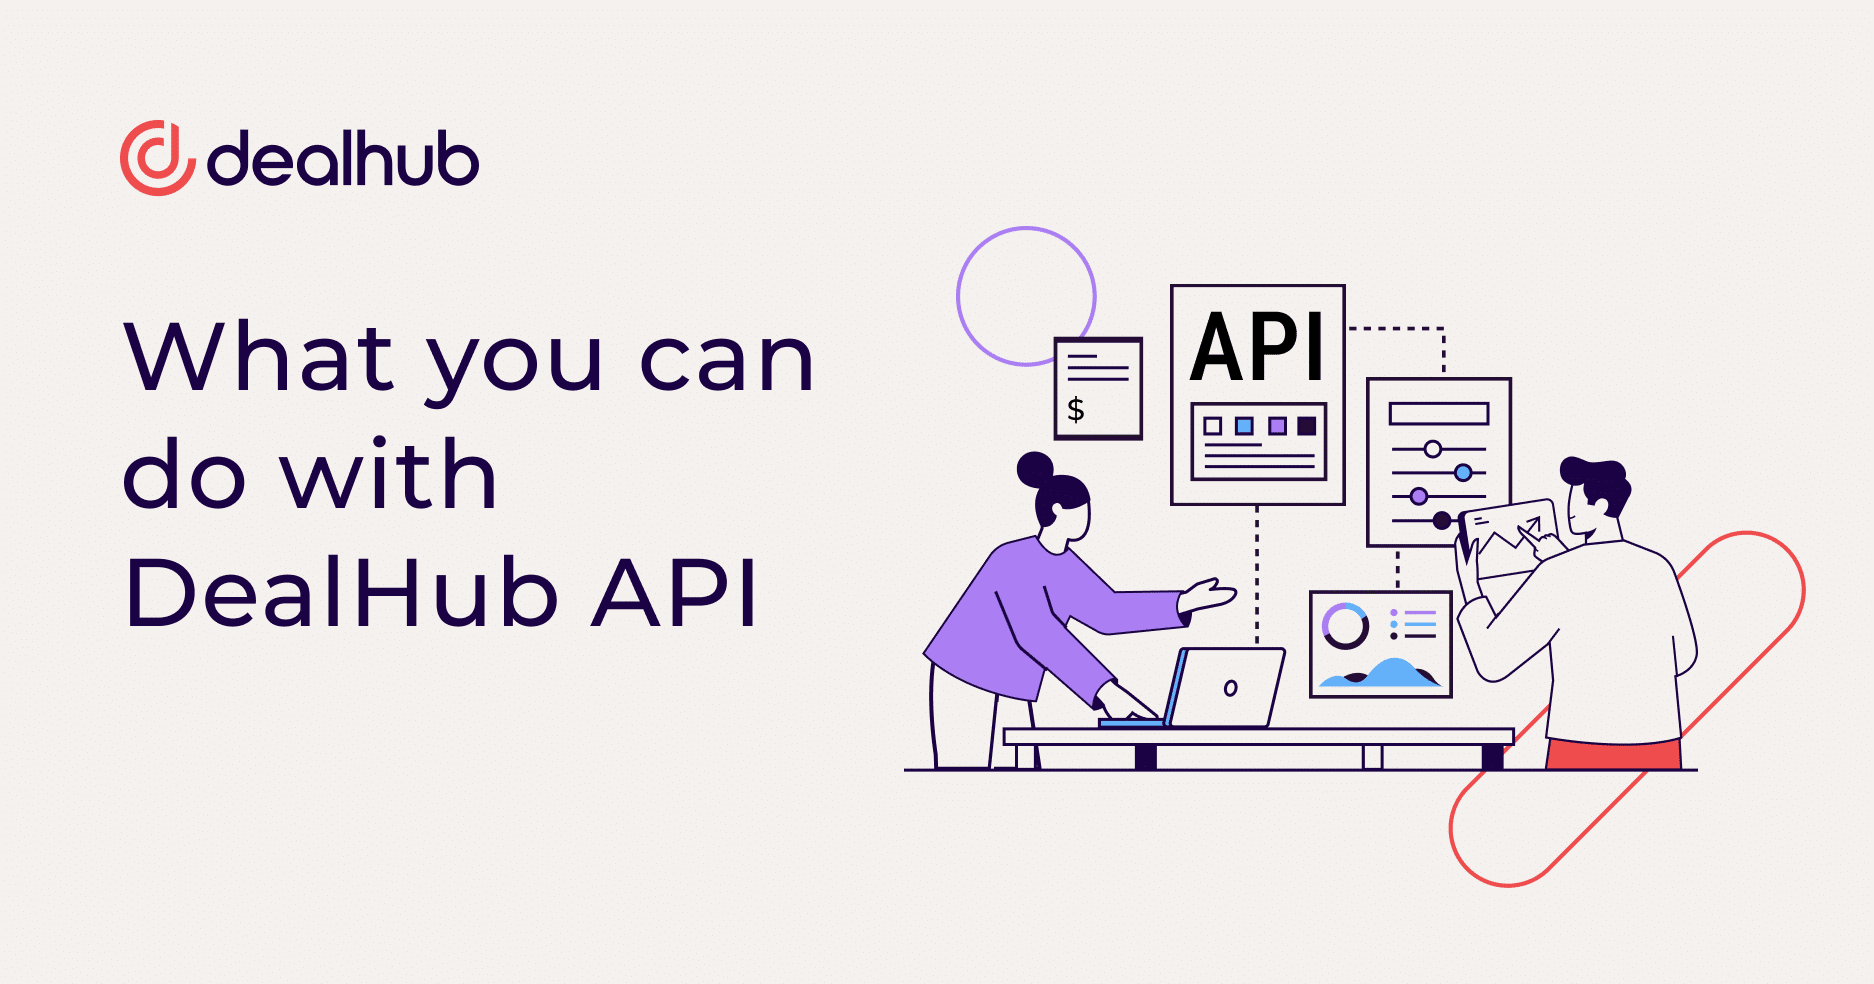 What you can do with DealHub API